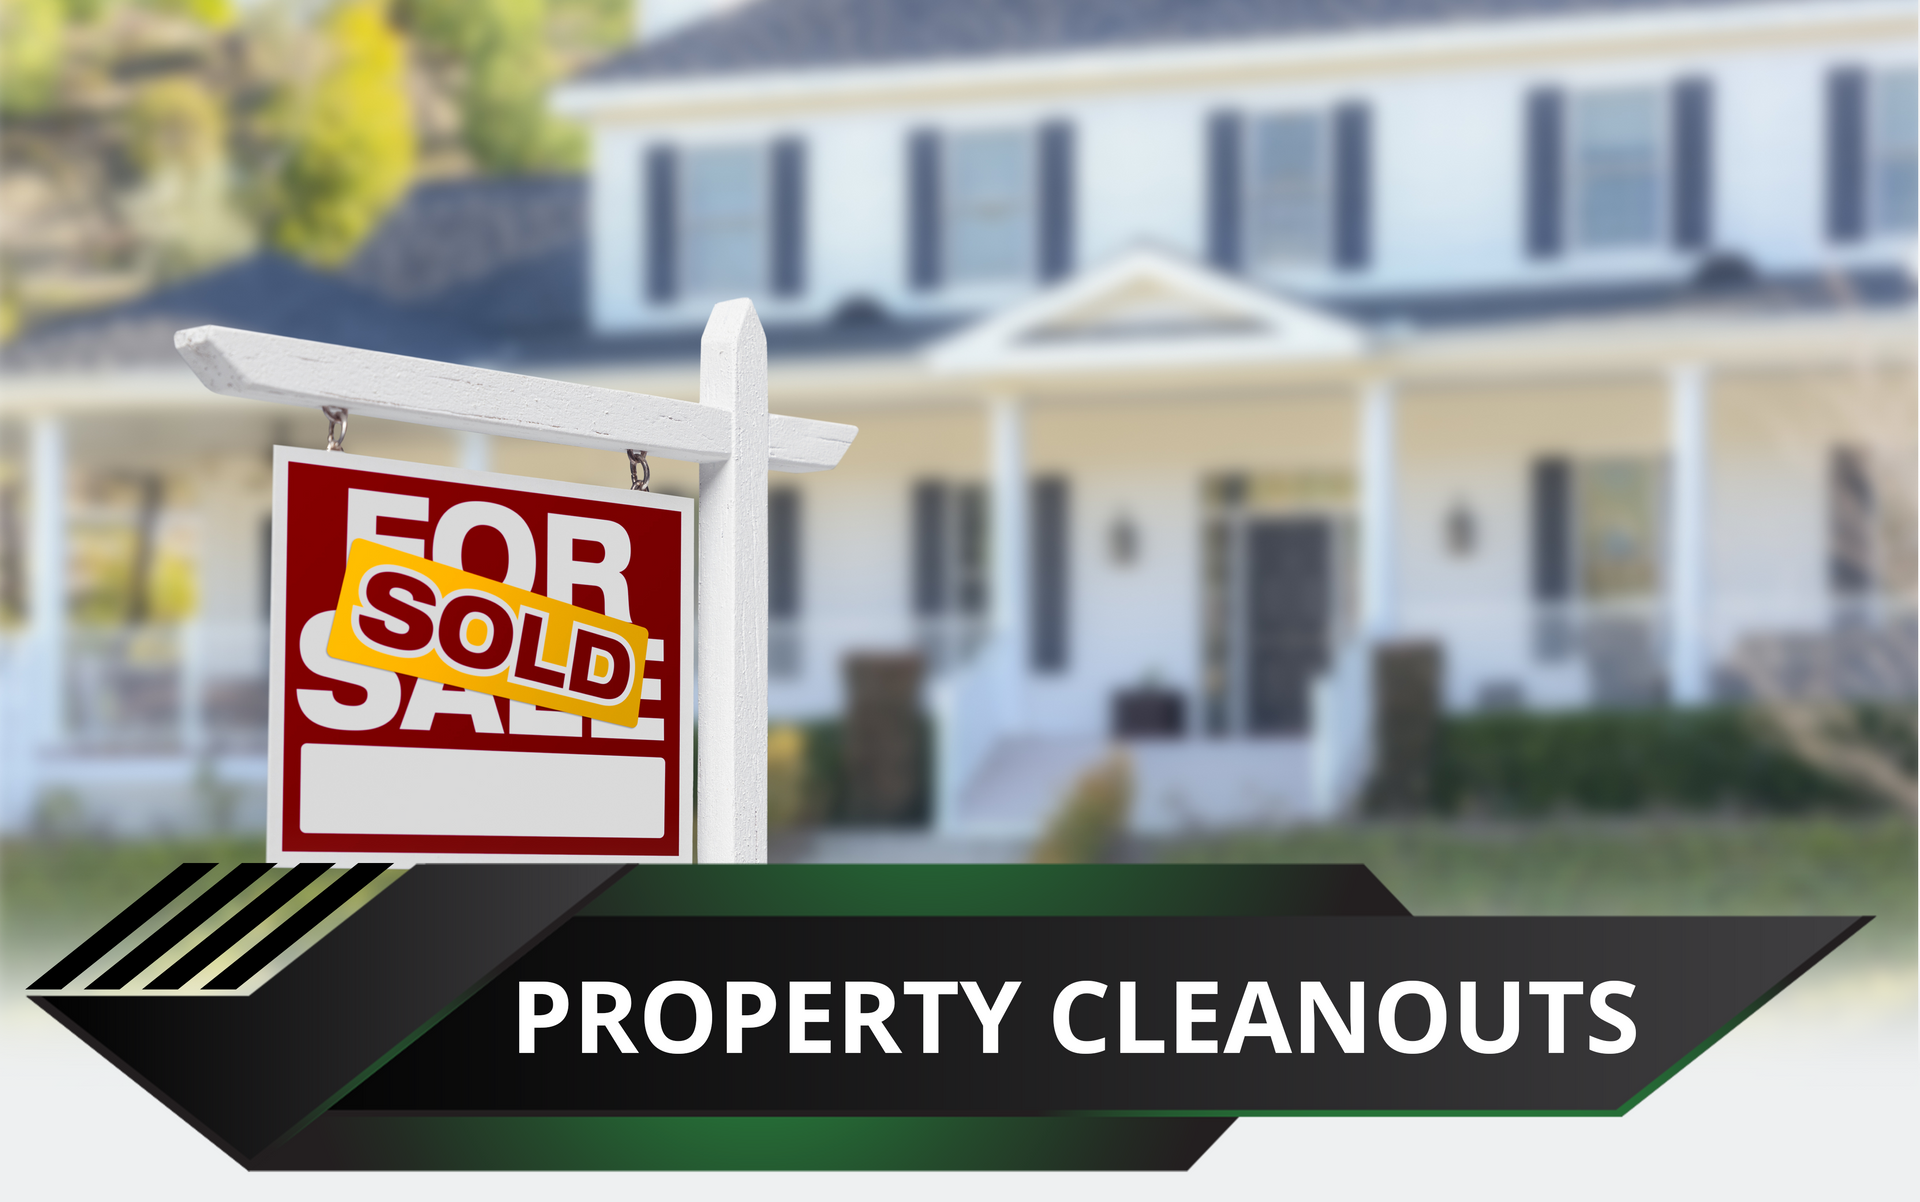 Property Cleanouts in Clovis